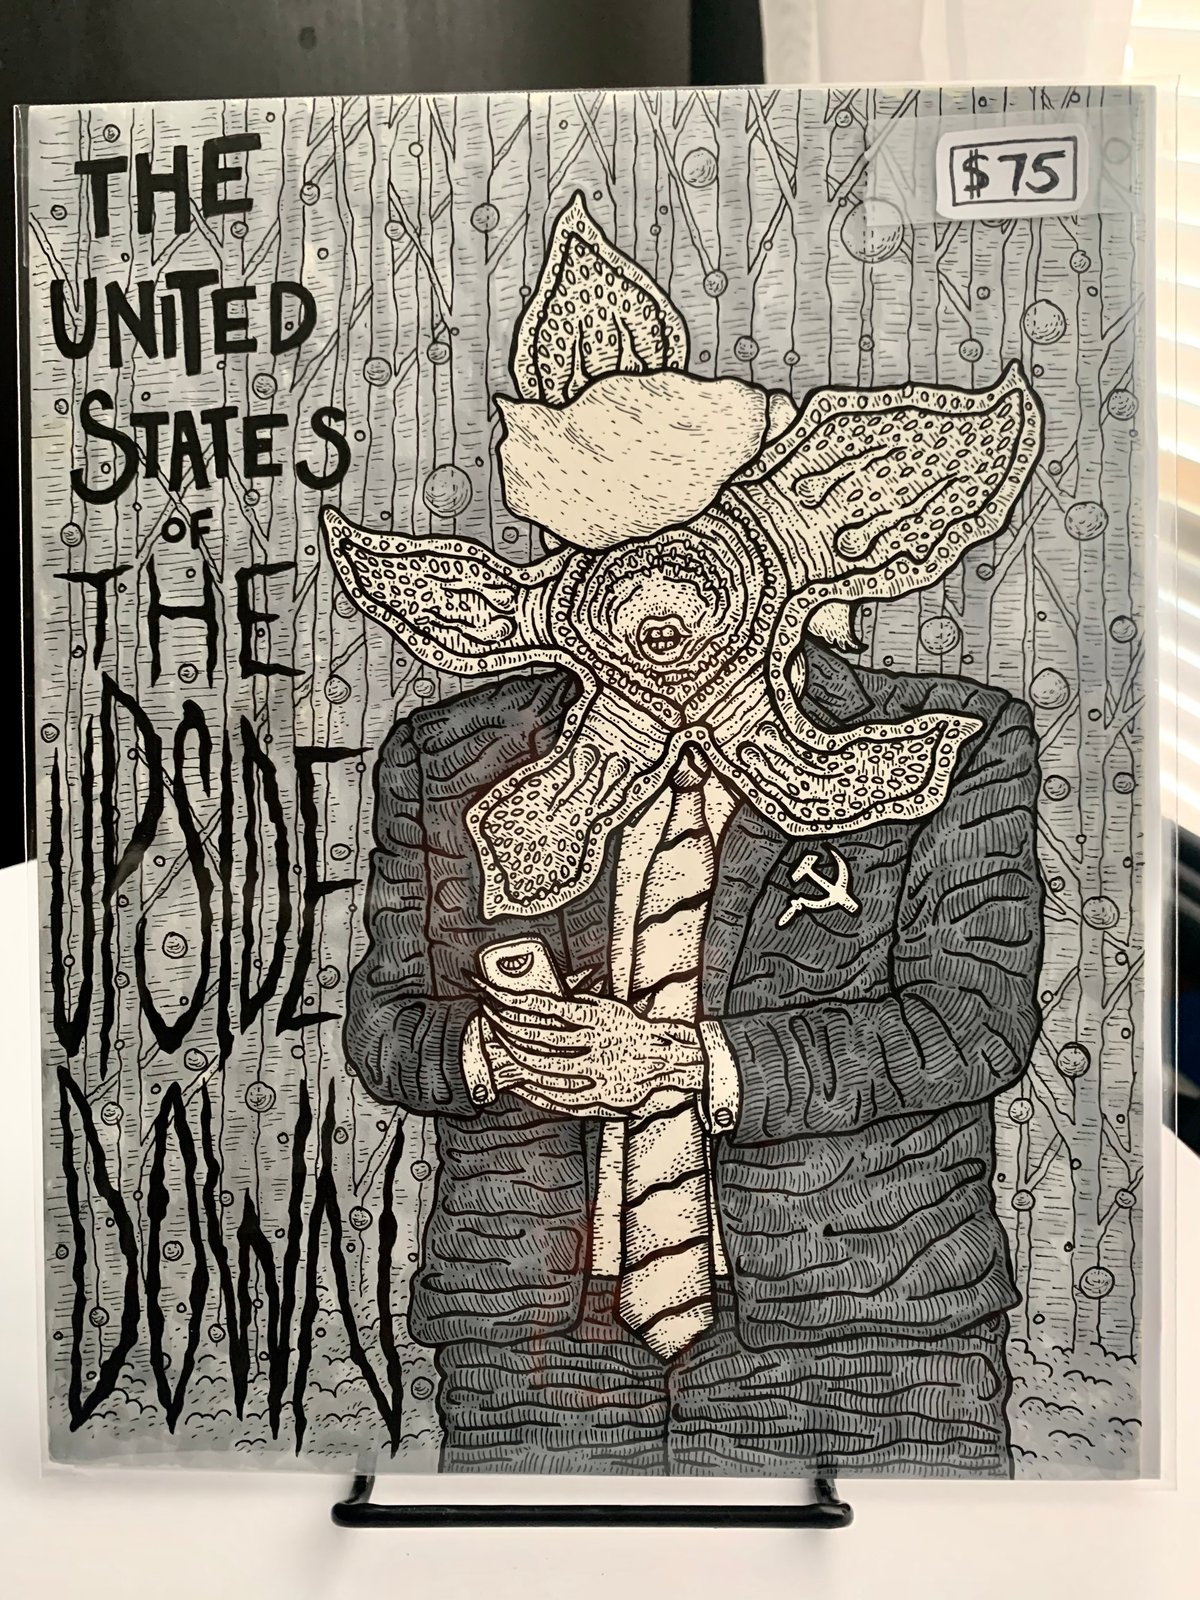 Image of United States of the Upside Down